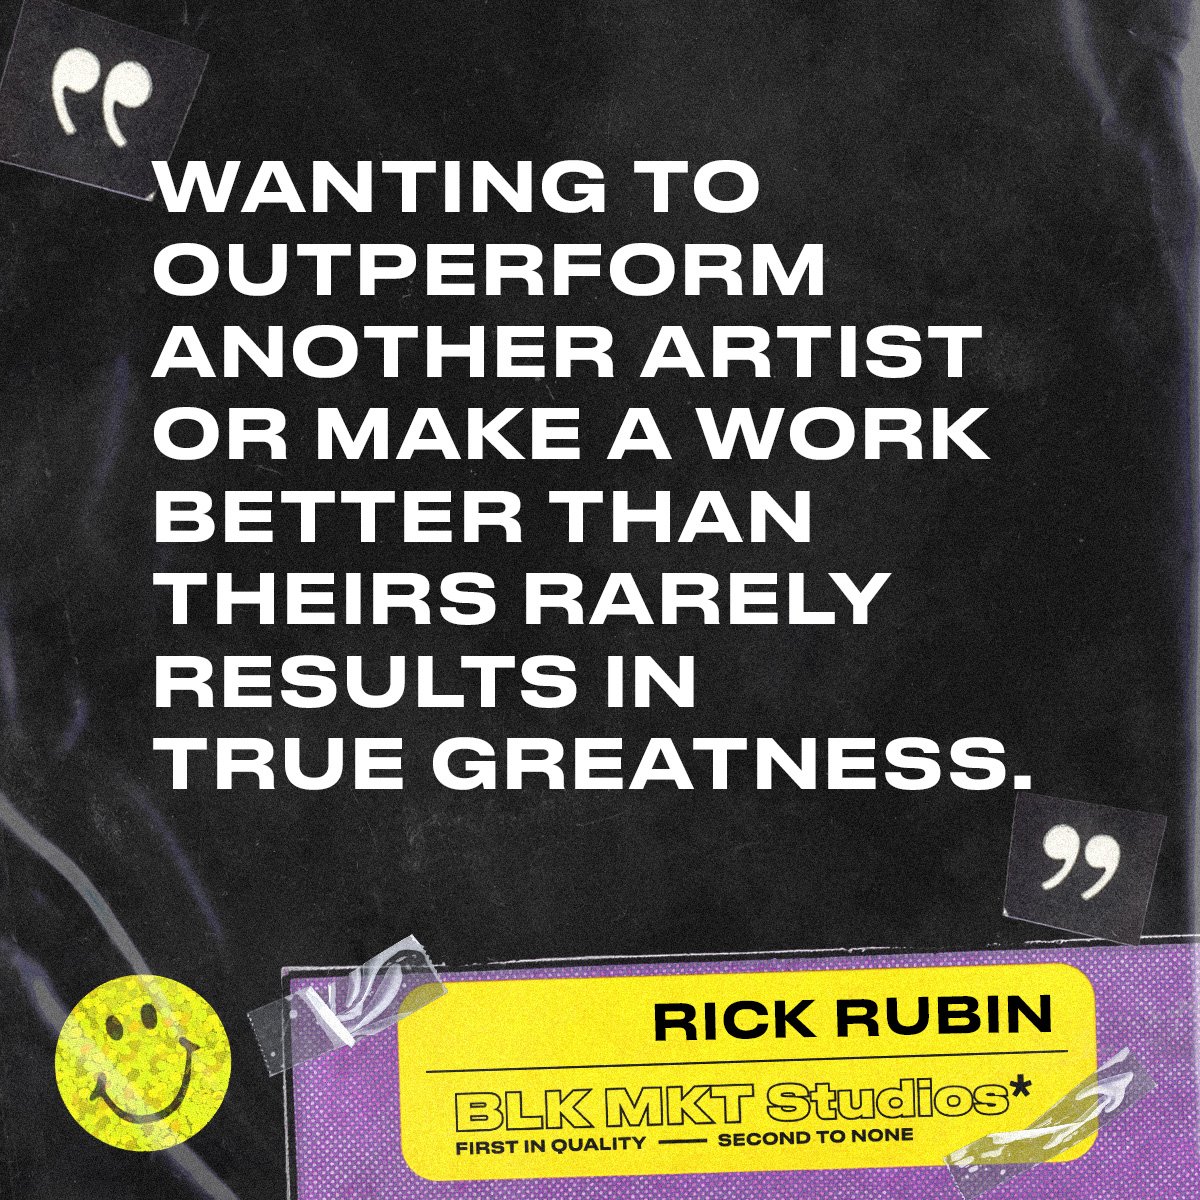 This quote from Rick Rubin&rsquo;s &ldquo;The Creative Act&rdquo; made us stop and consider its relevance to marketing. Carving out your own niche and speaking directly to your audience's needs is the name of the game in content marketing. 

By prior